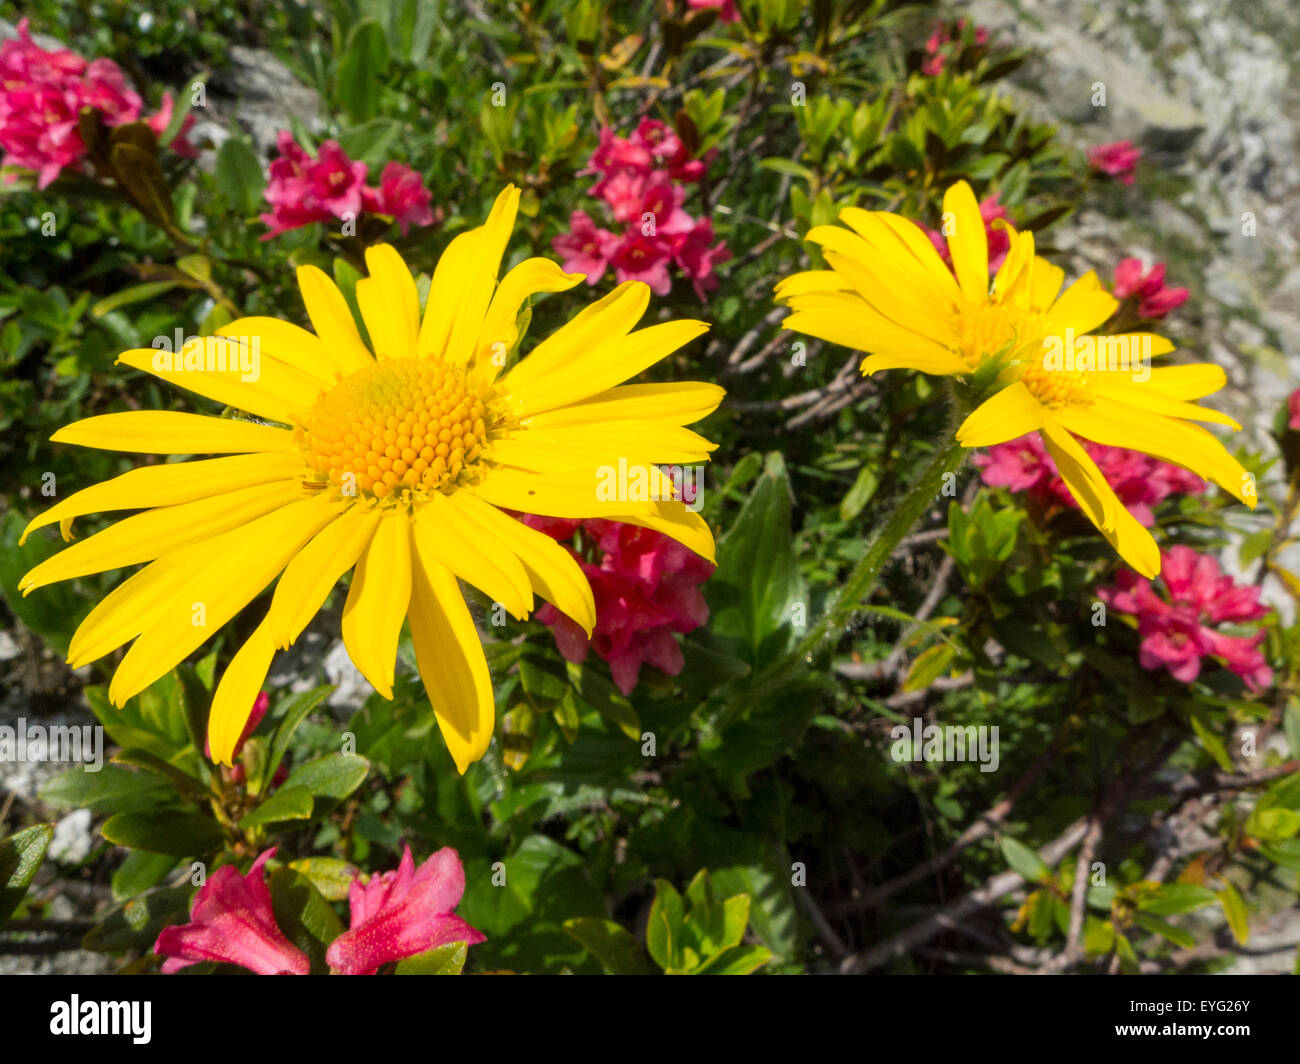 ItalyCentral Alps Trentino Adamello-Brenta Natural Park 5 lakes trail Alpenrose(Rhododendron ferrugineum and Doronicum clusii Stock Photo